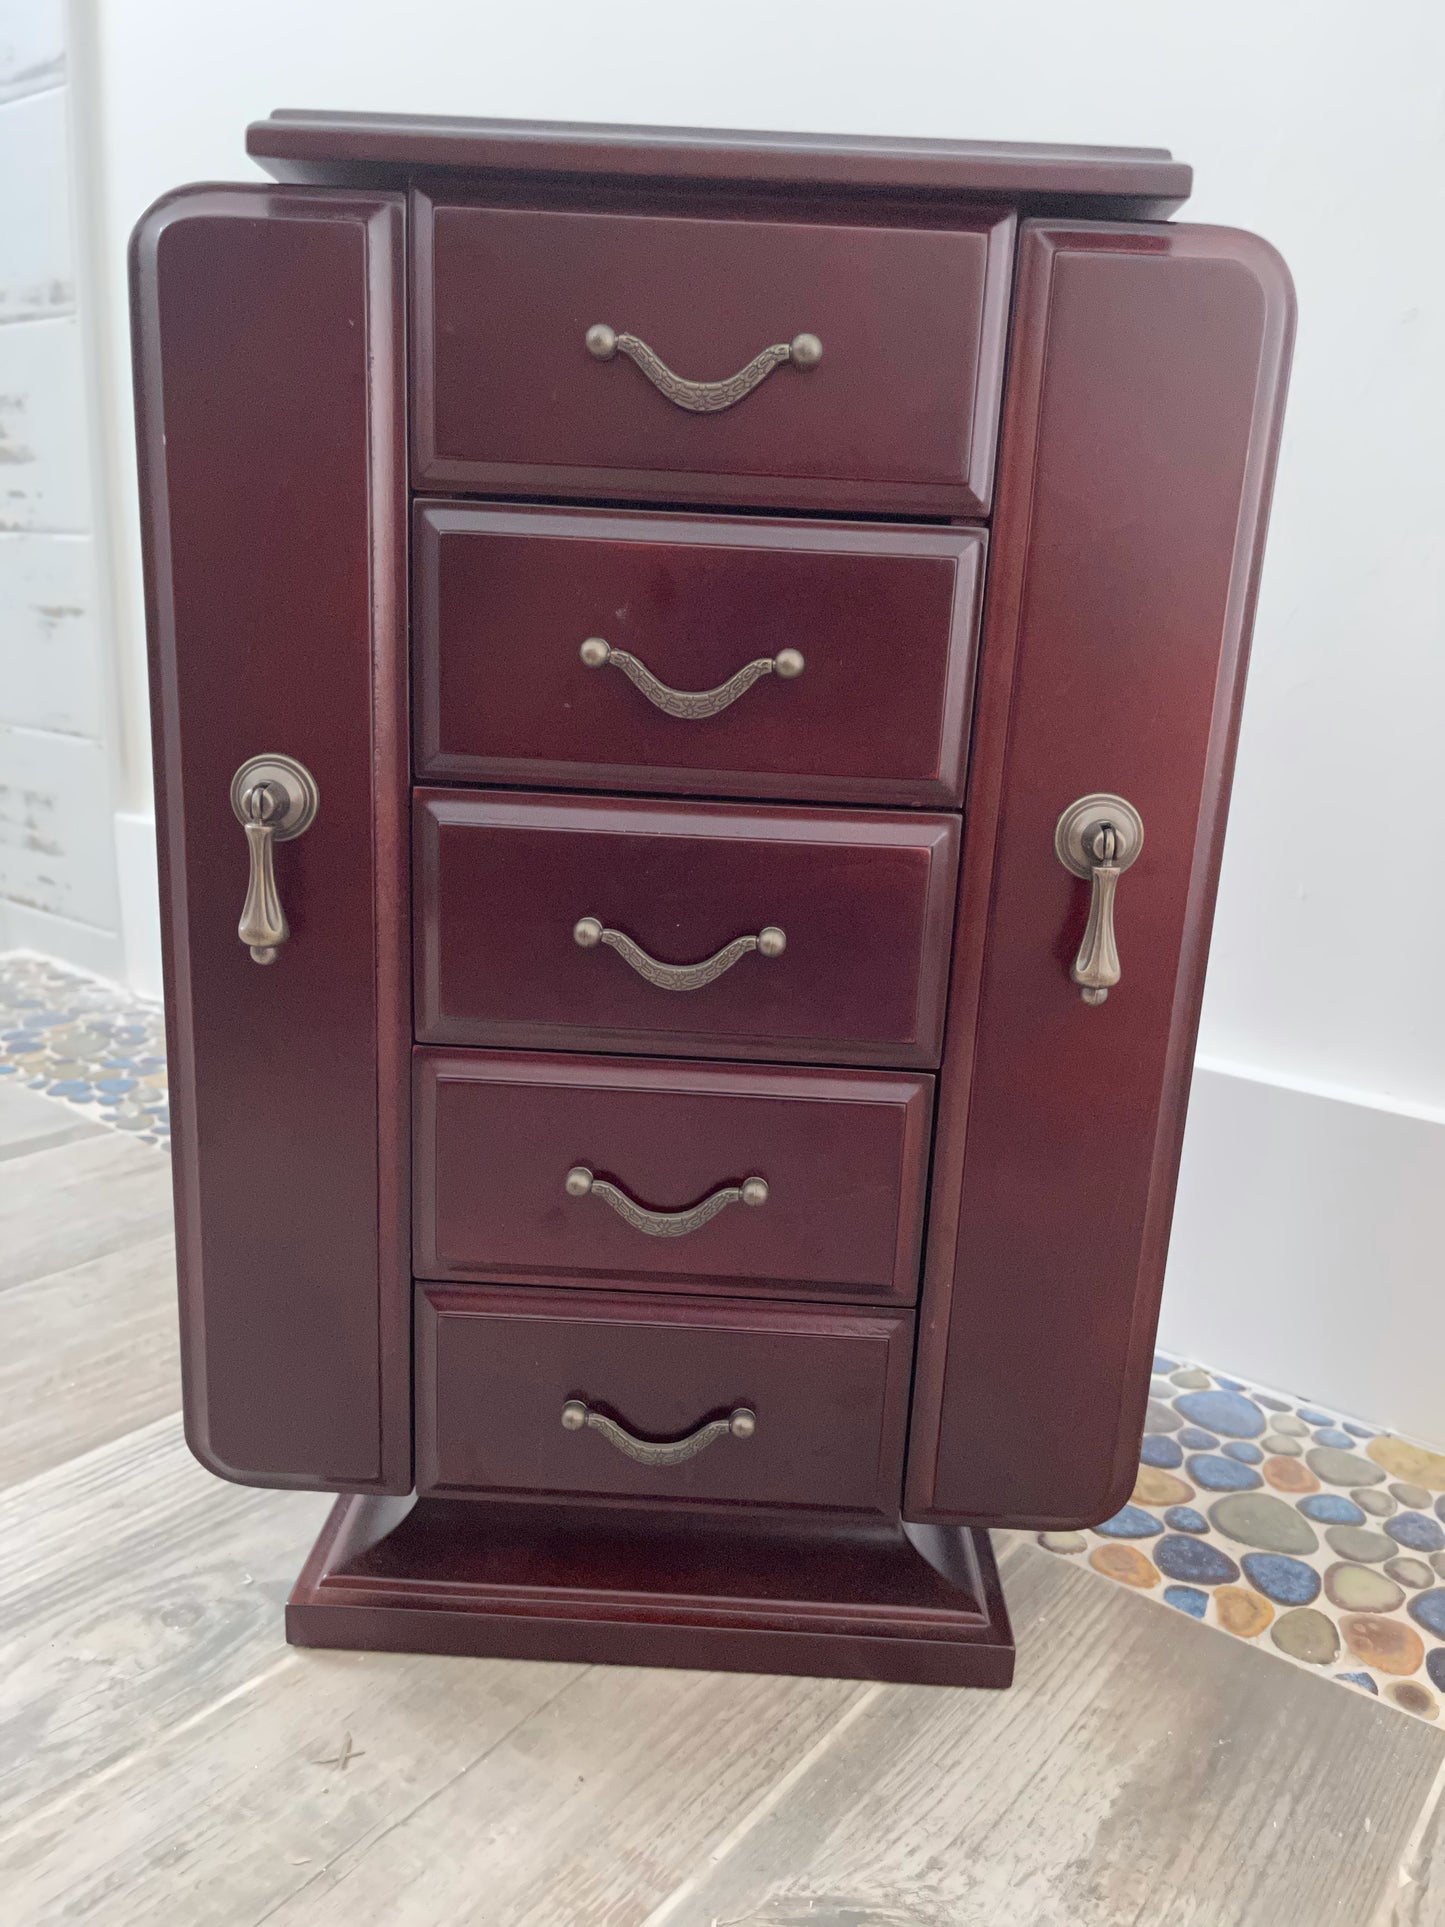 Absolutely Beautiful and Large Vintage Jewelry Cabinet, Old World Vintage